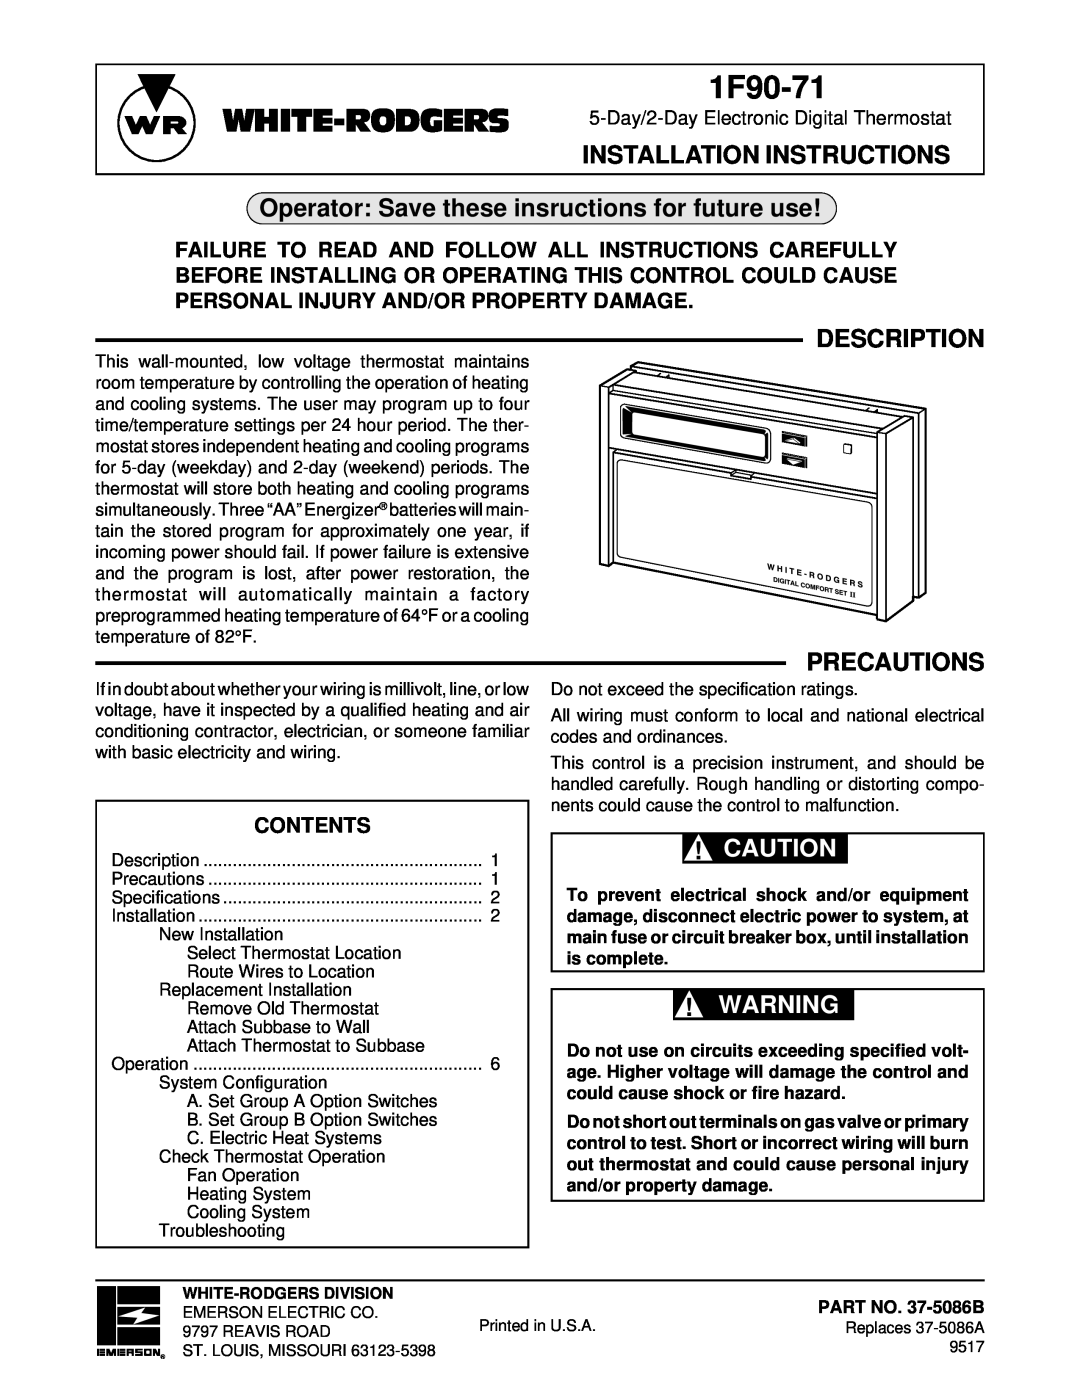 White Rodgers 37-5086A installation instructions Operator Save these insructions for future use, Description, Precautions 